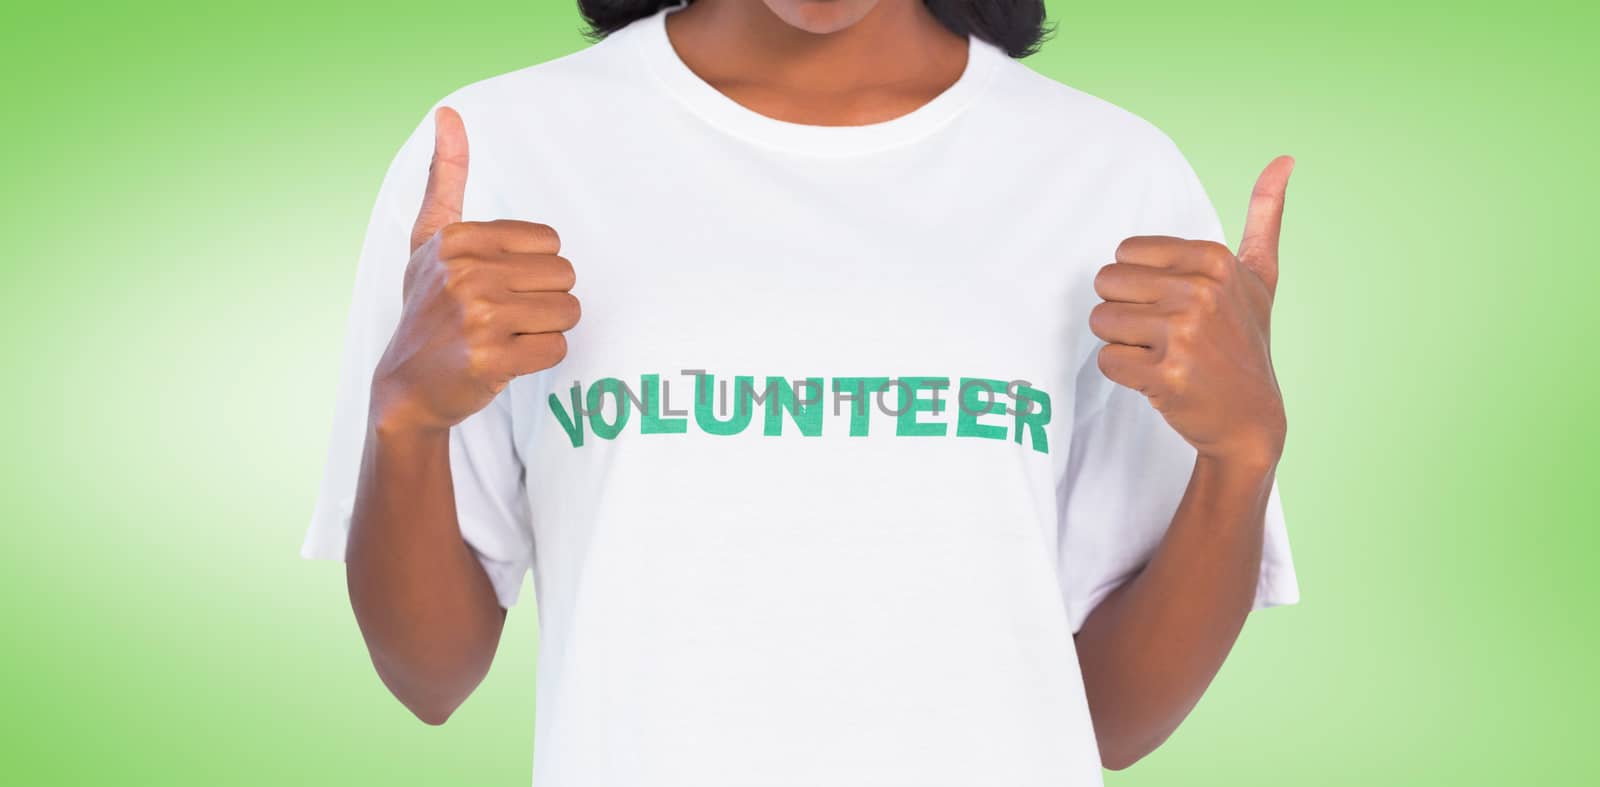 Woman wearing volunteer tshirt and giving thumbs up against green vignette